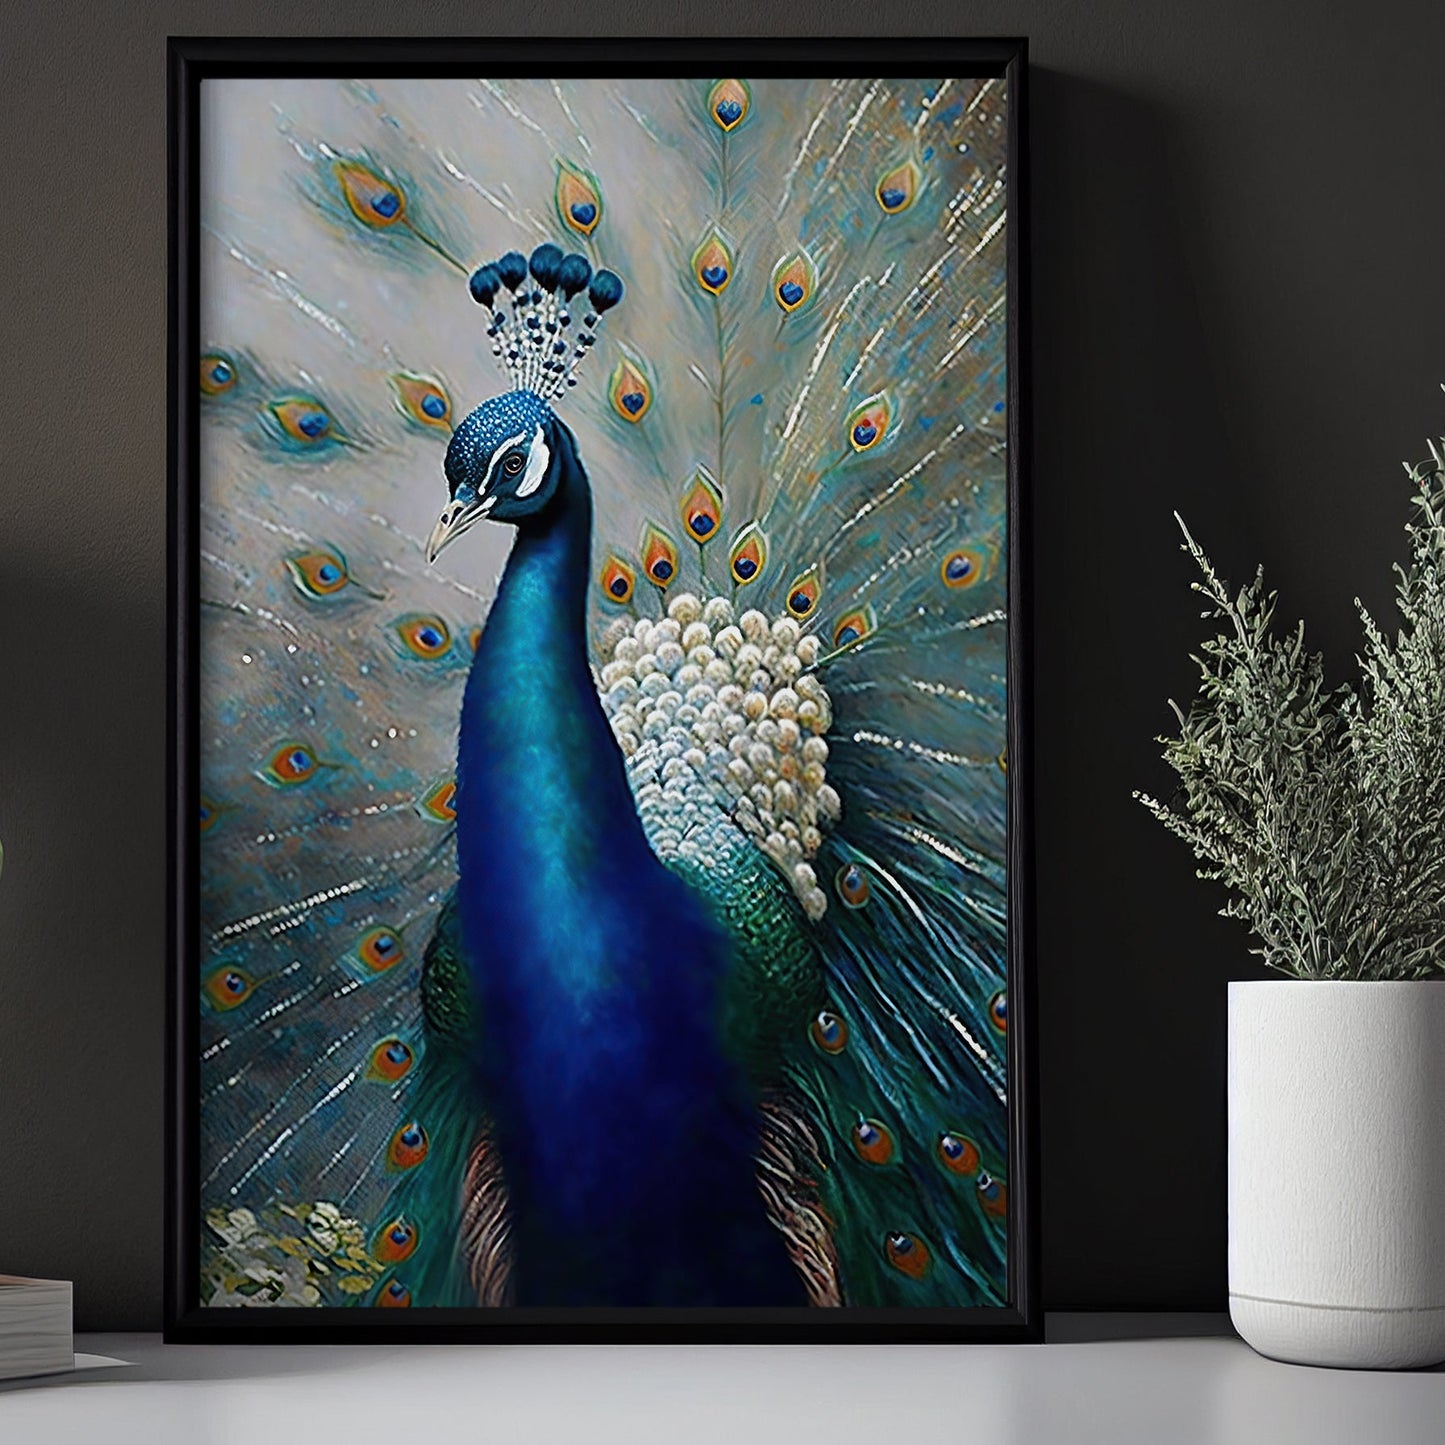 Majestic Captivating Peacock, Modern Canvas Painting, Wall Art Decor - Poster Gift For Peacock Lovers